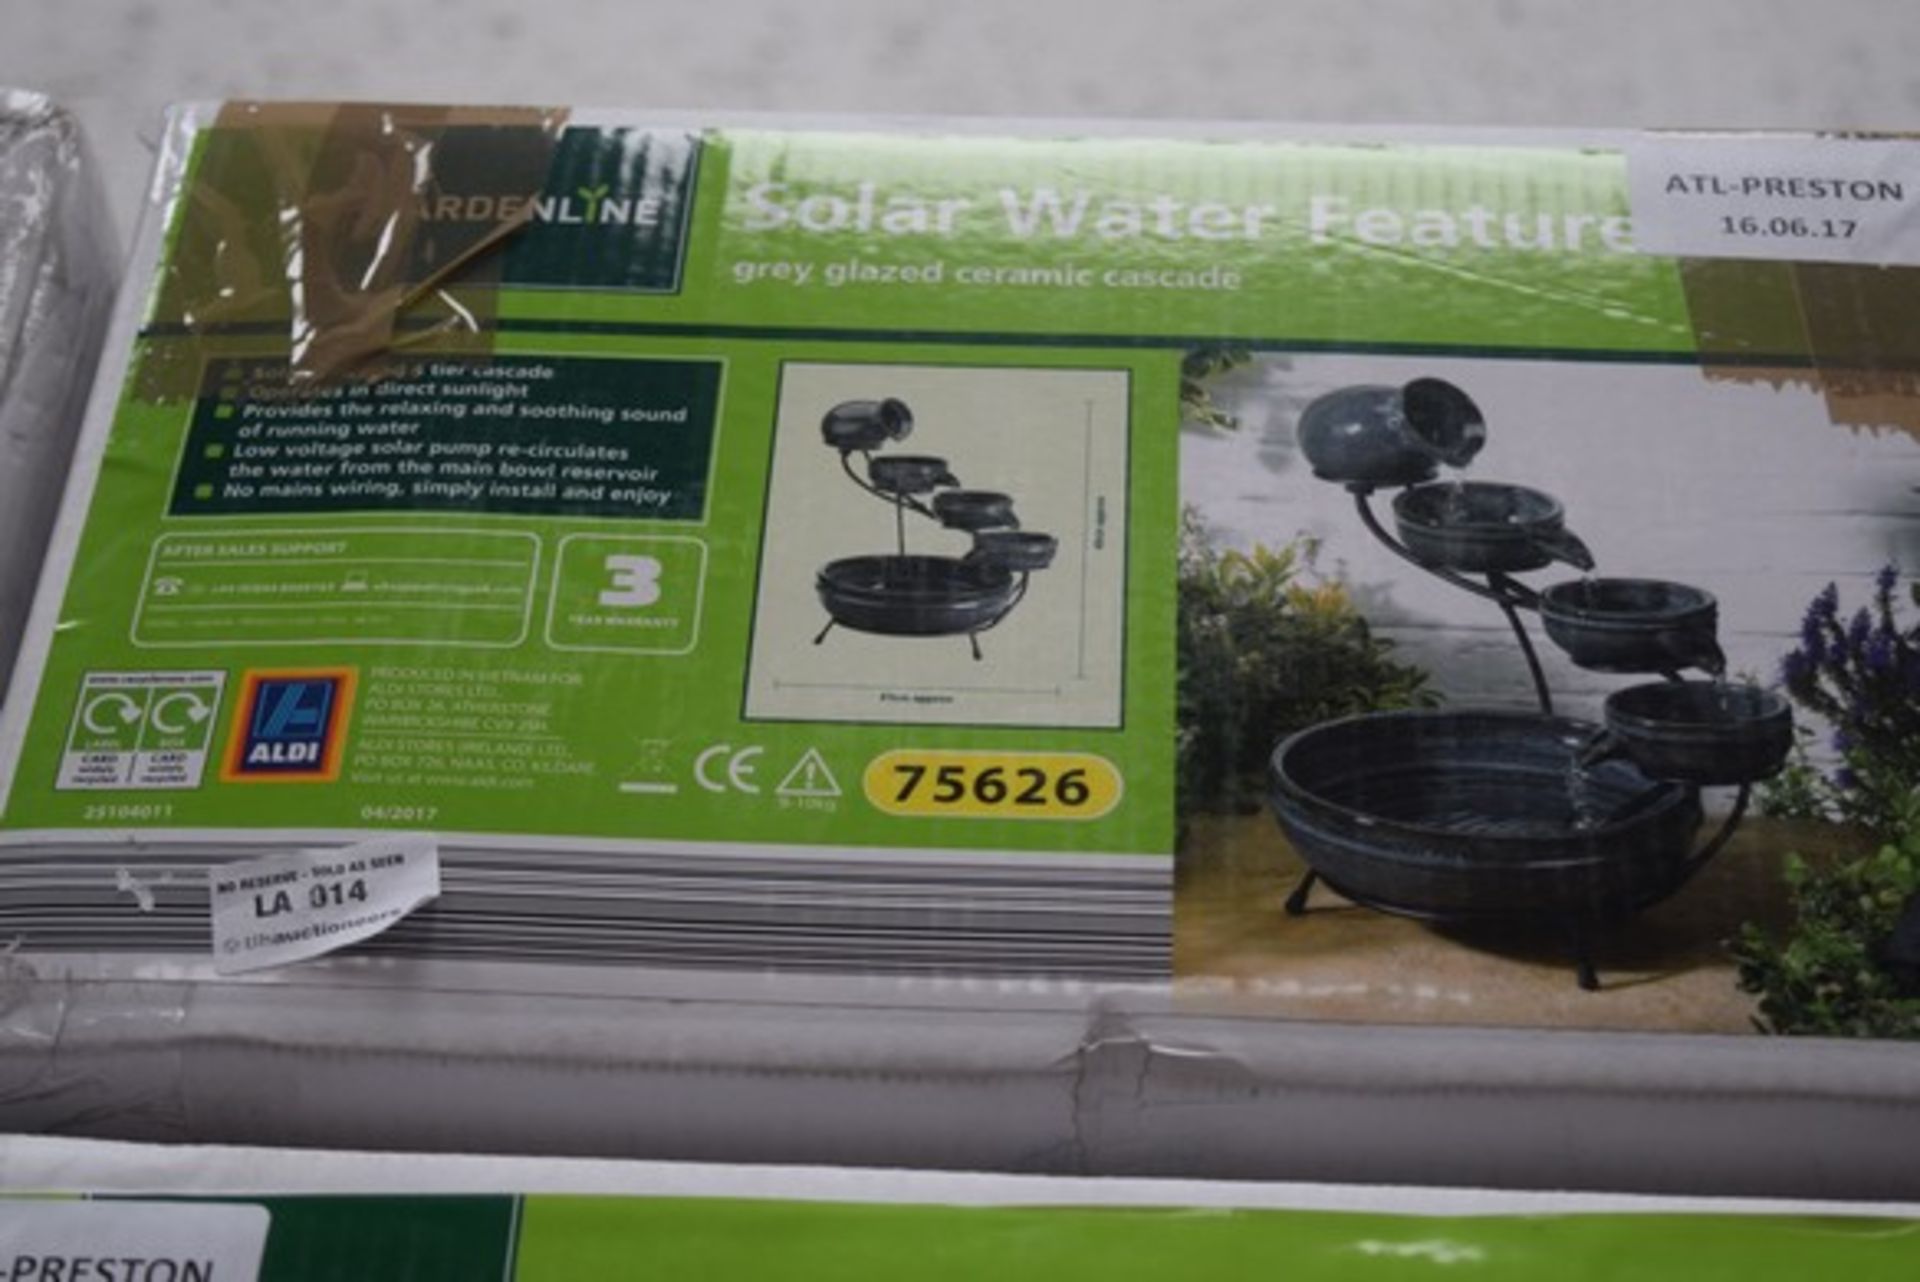 1 x BOXED GARDEN LINES SOLAR WATER FEATURE RRP £50 16.06.17 *PLEASE NOTE THAT THE BID PRICE IS